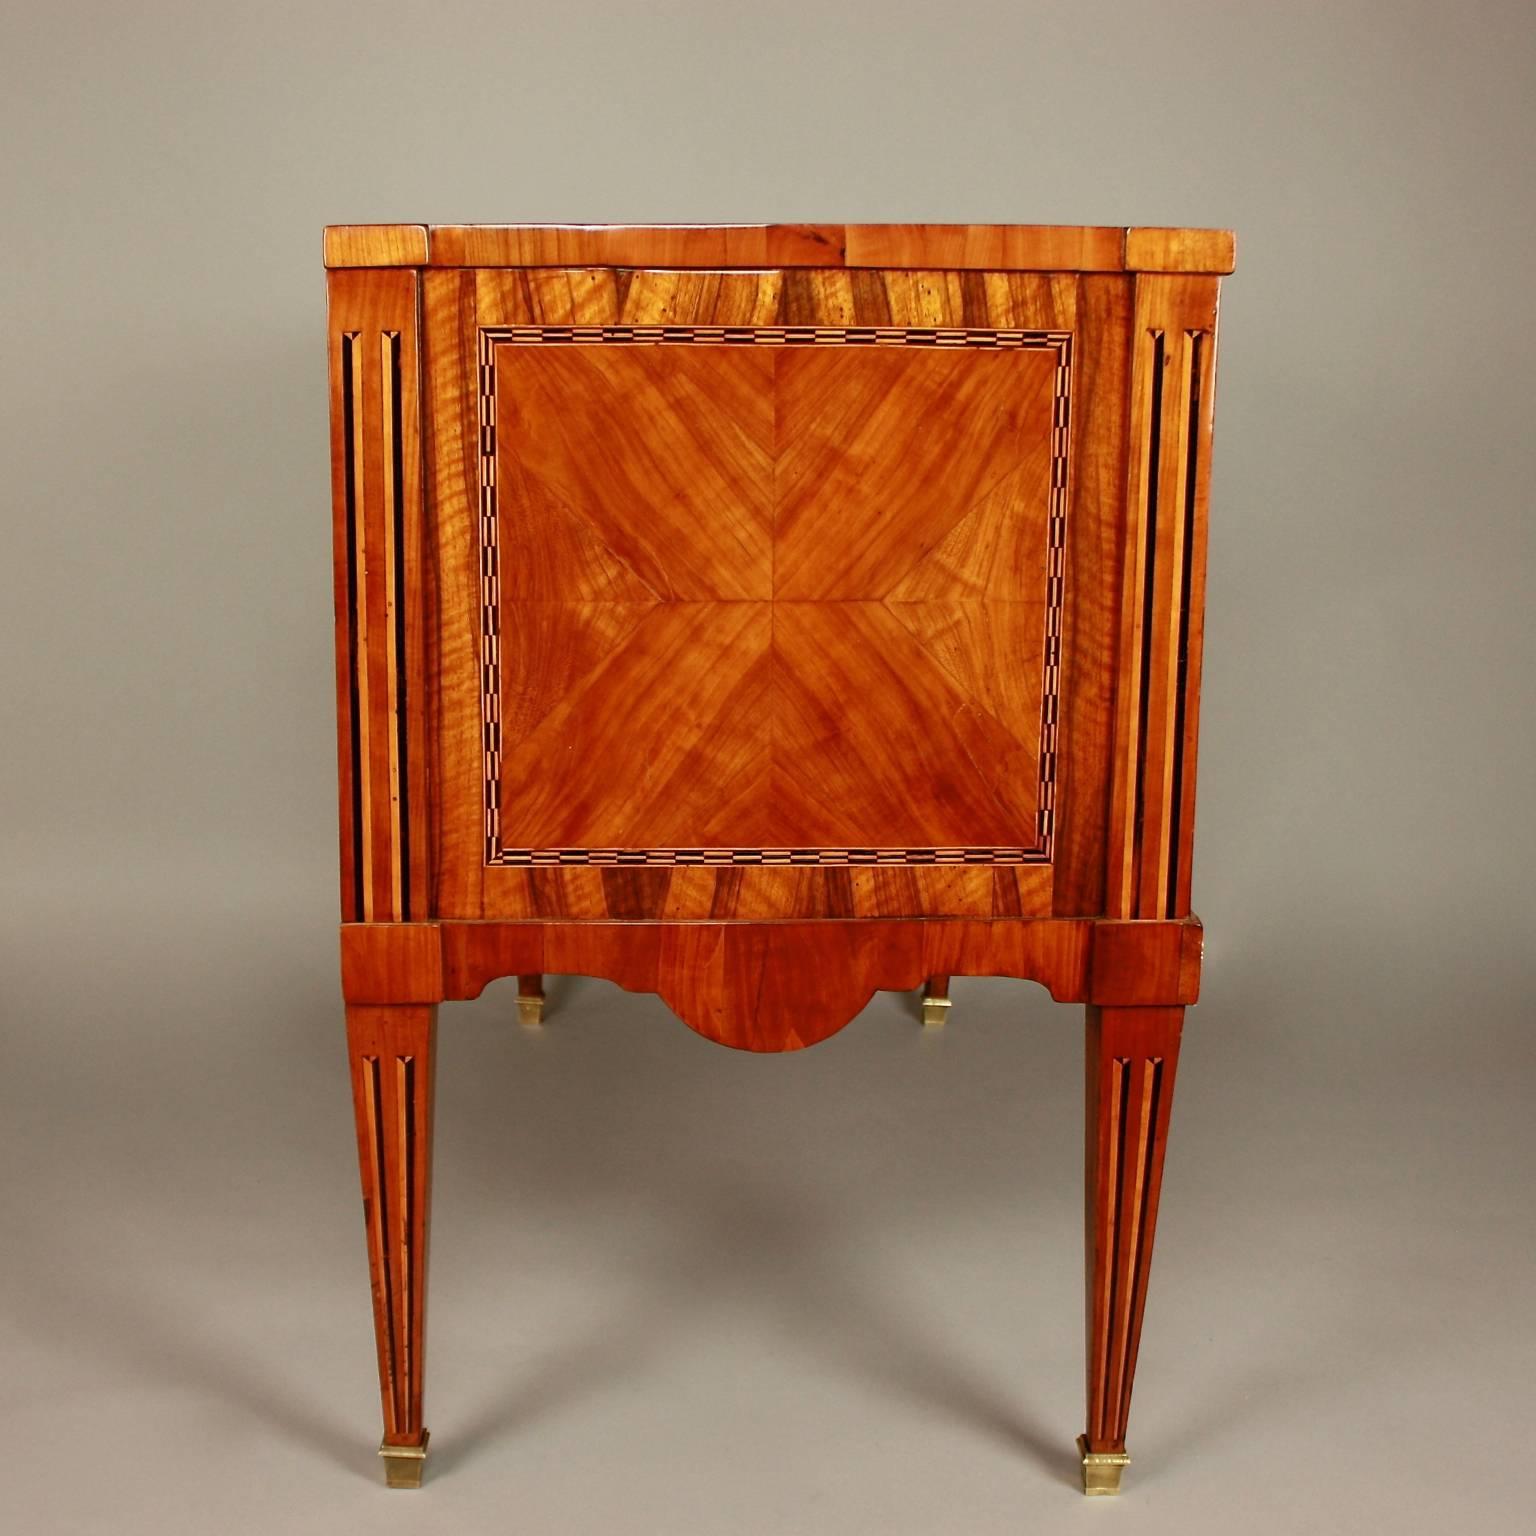 18th Century French Louis XVI Gilt-Bronze Mounted Geometrical Marquetry Commode For Sale 3